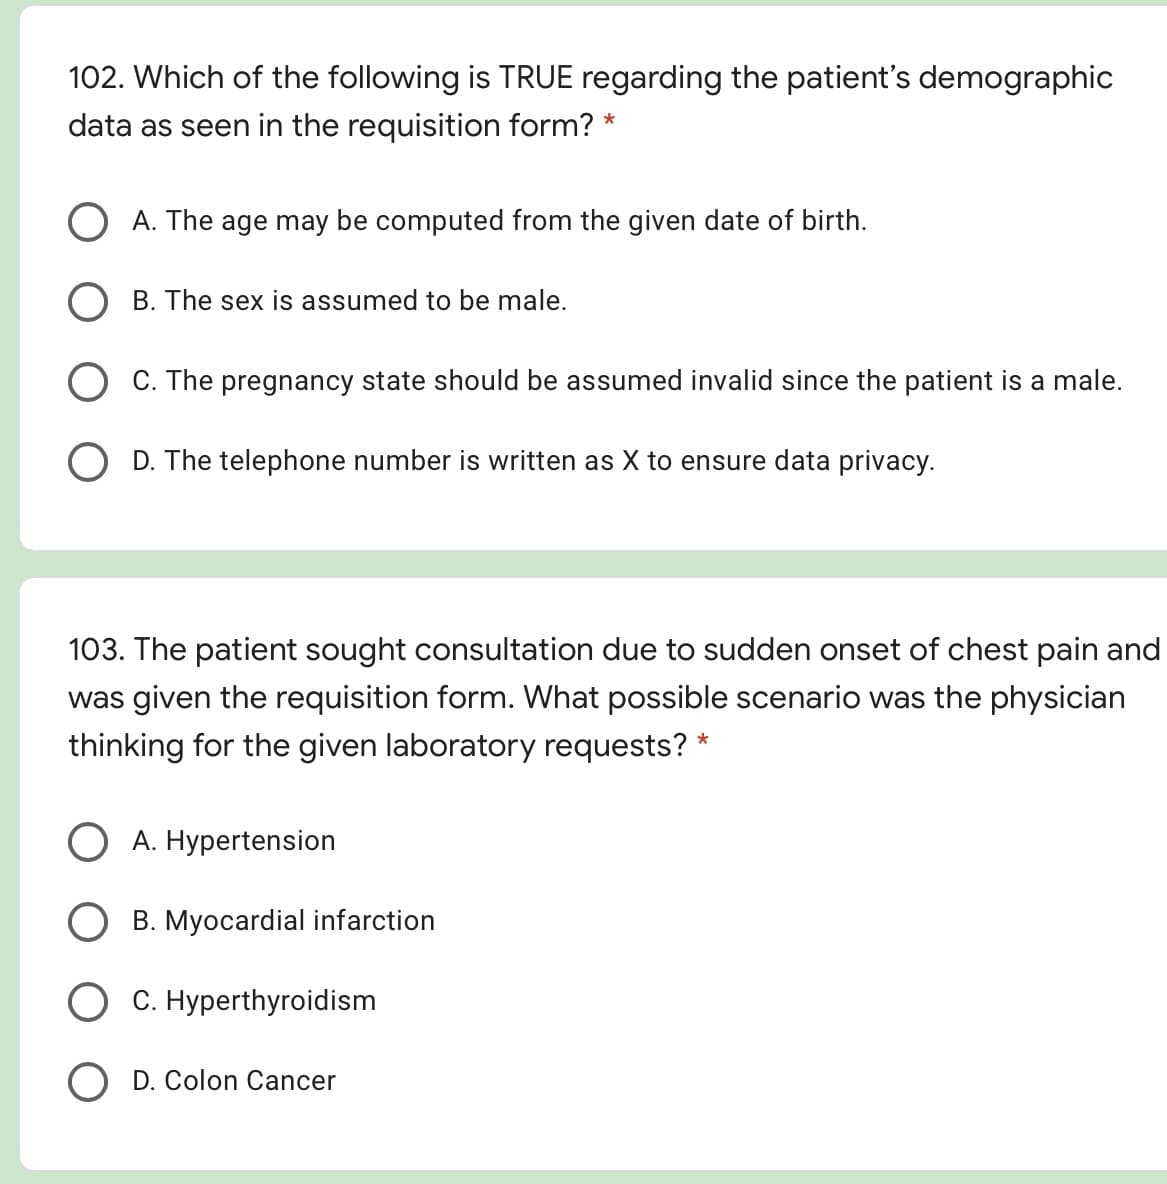 102. Which of the following is TRUE regarding the patient's demographic
data as seen in the requisition form? *
O A. The age may be computed from the given date of birth.
B. The sex is assumed to be male.
O C. The pregnancy state should be assumed invalid since the patient is a male.
O D. The telephone number is written as X to ens
ure data privacy.
103. The patient sought consultation due to sudden onset of chest pain and
was given the requisition form. What possible scenario was the physician
thinking for the given laboratory requests? *
O A. Hypertension
B. Myocardial infarction
C. Hyperthyroidism
D. Colon Cancer
